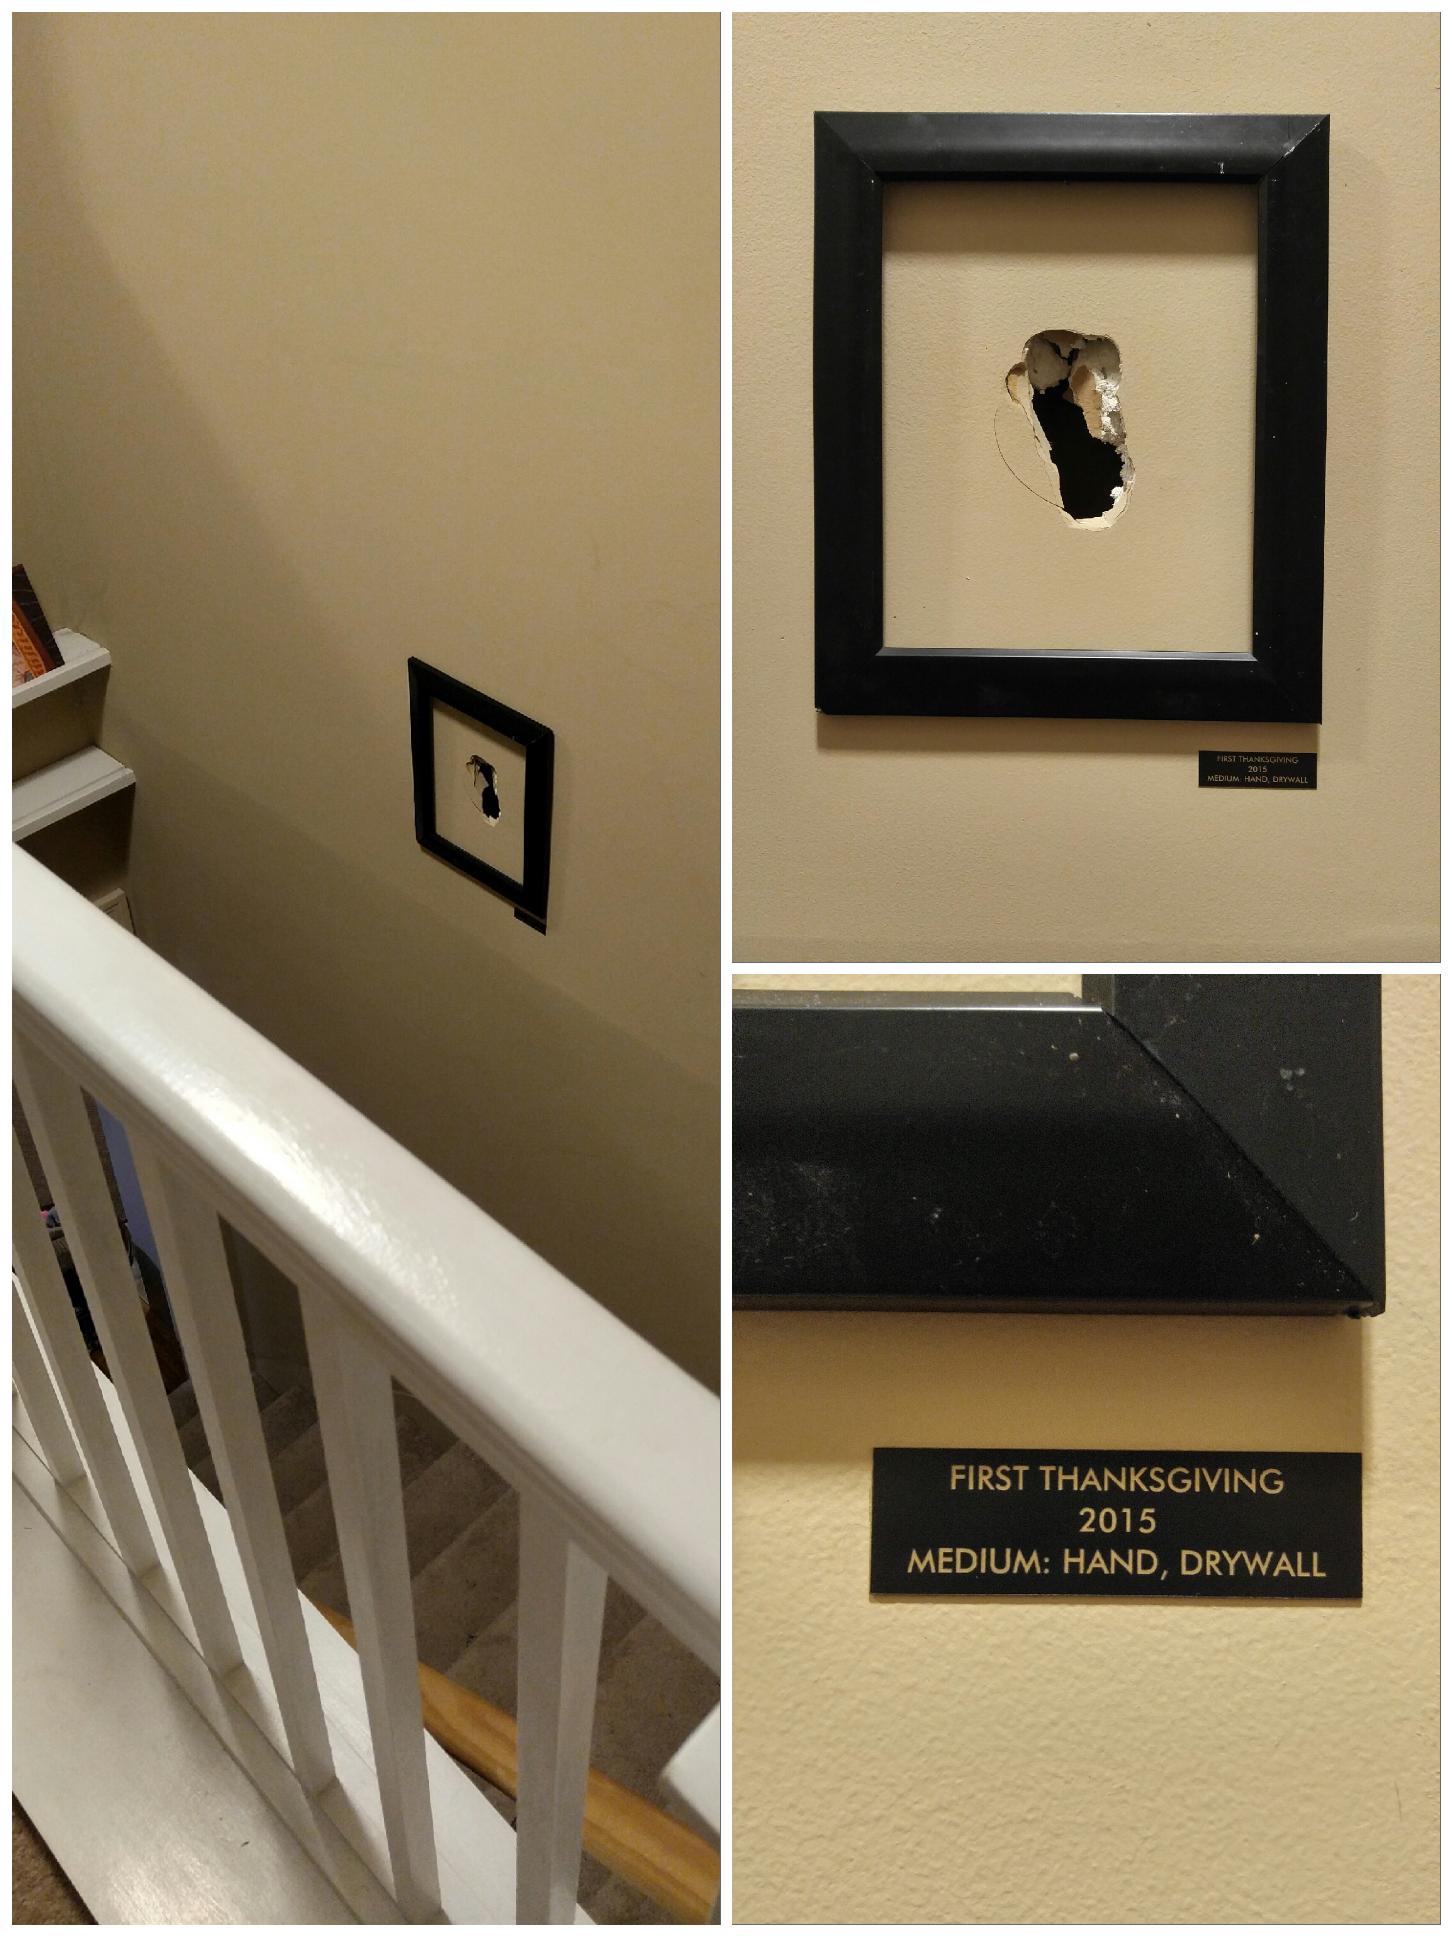 hole in the wall thanksgiving - First Thanksgiving 2015 Medium Hand Drywall First Thanksgiving 2015 Medium Hand, Drywall